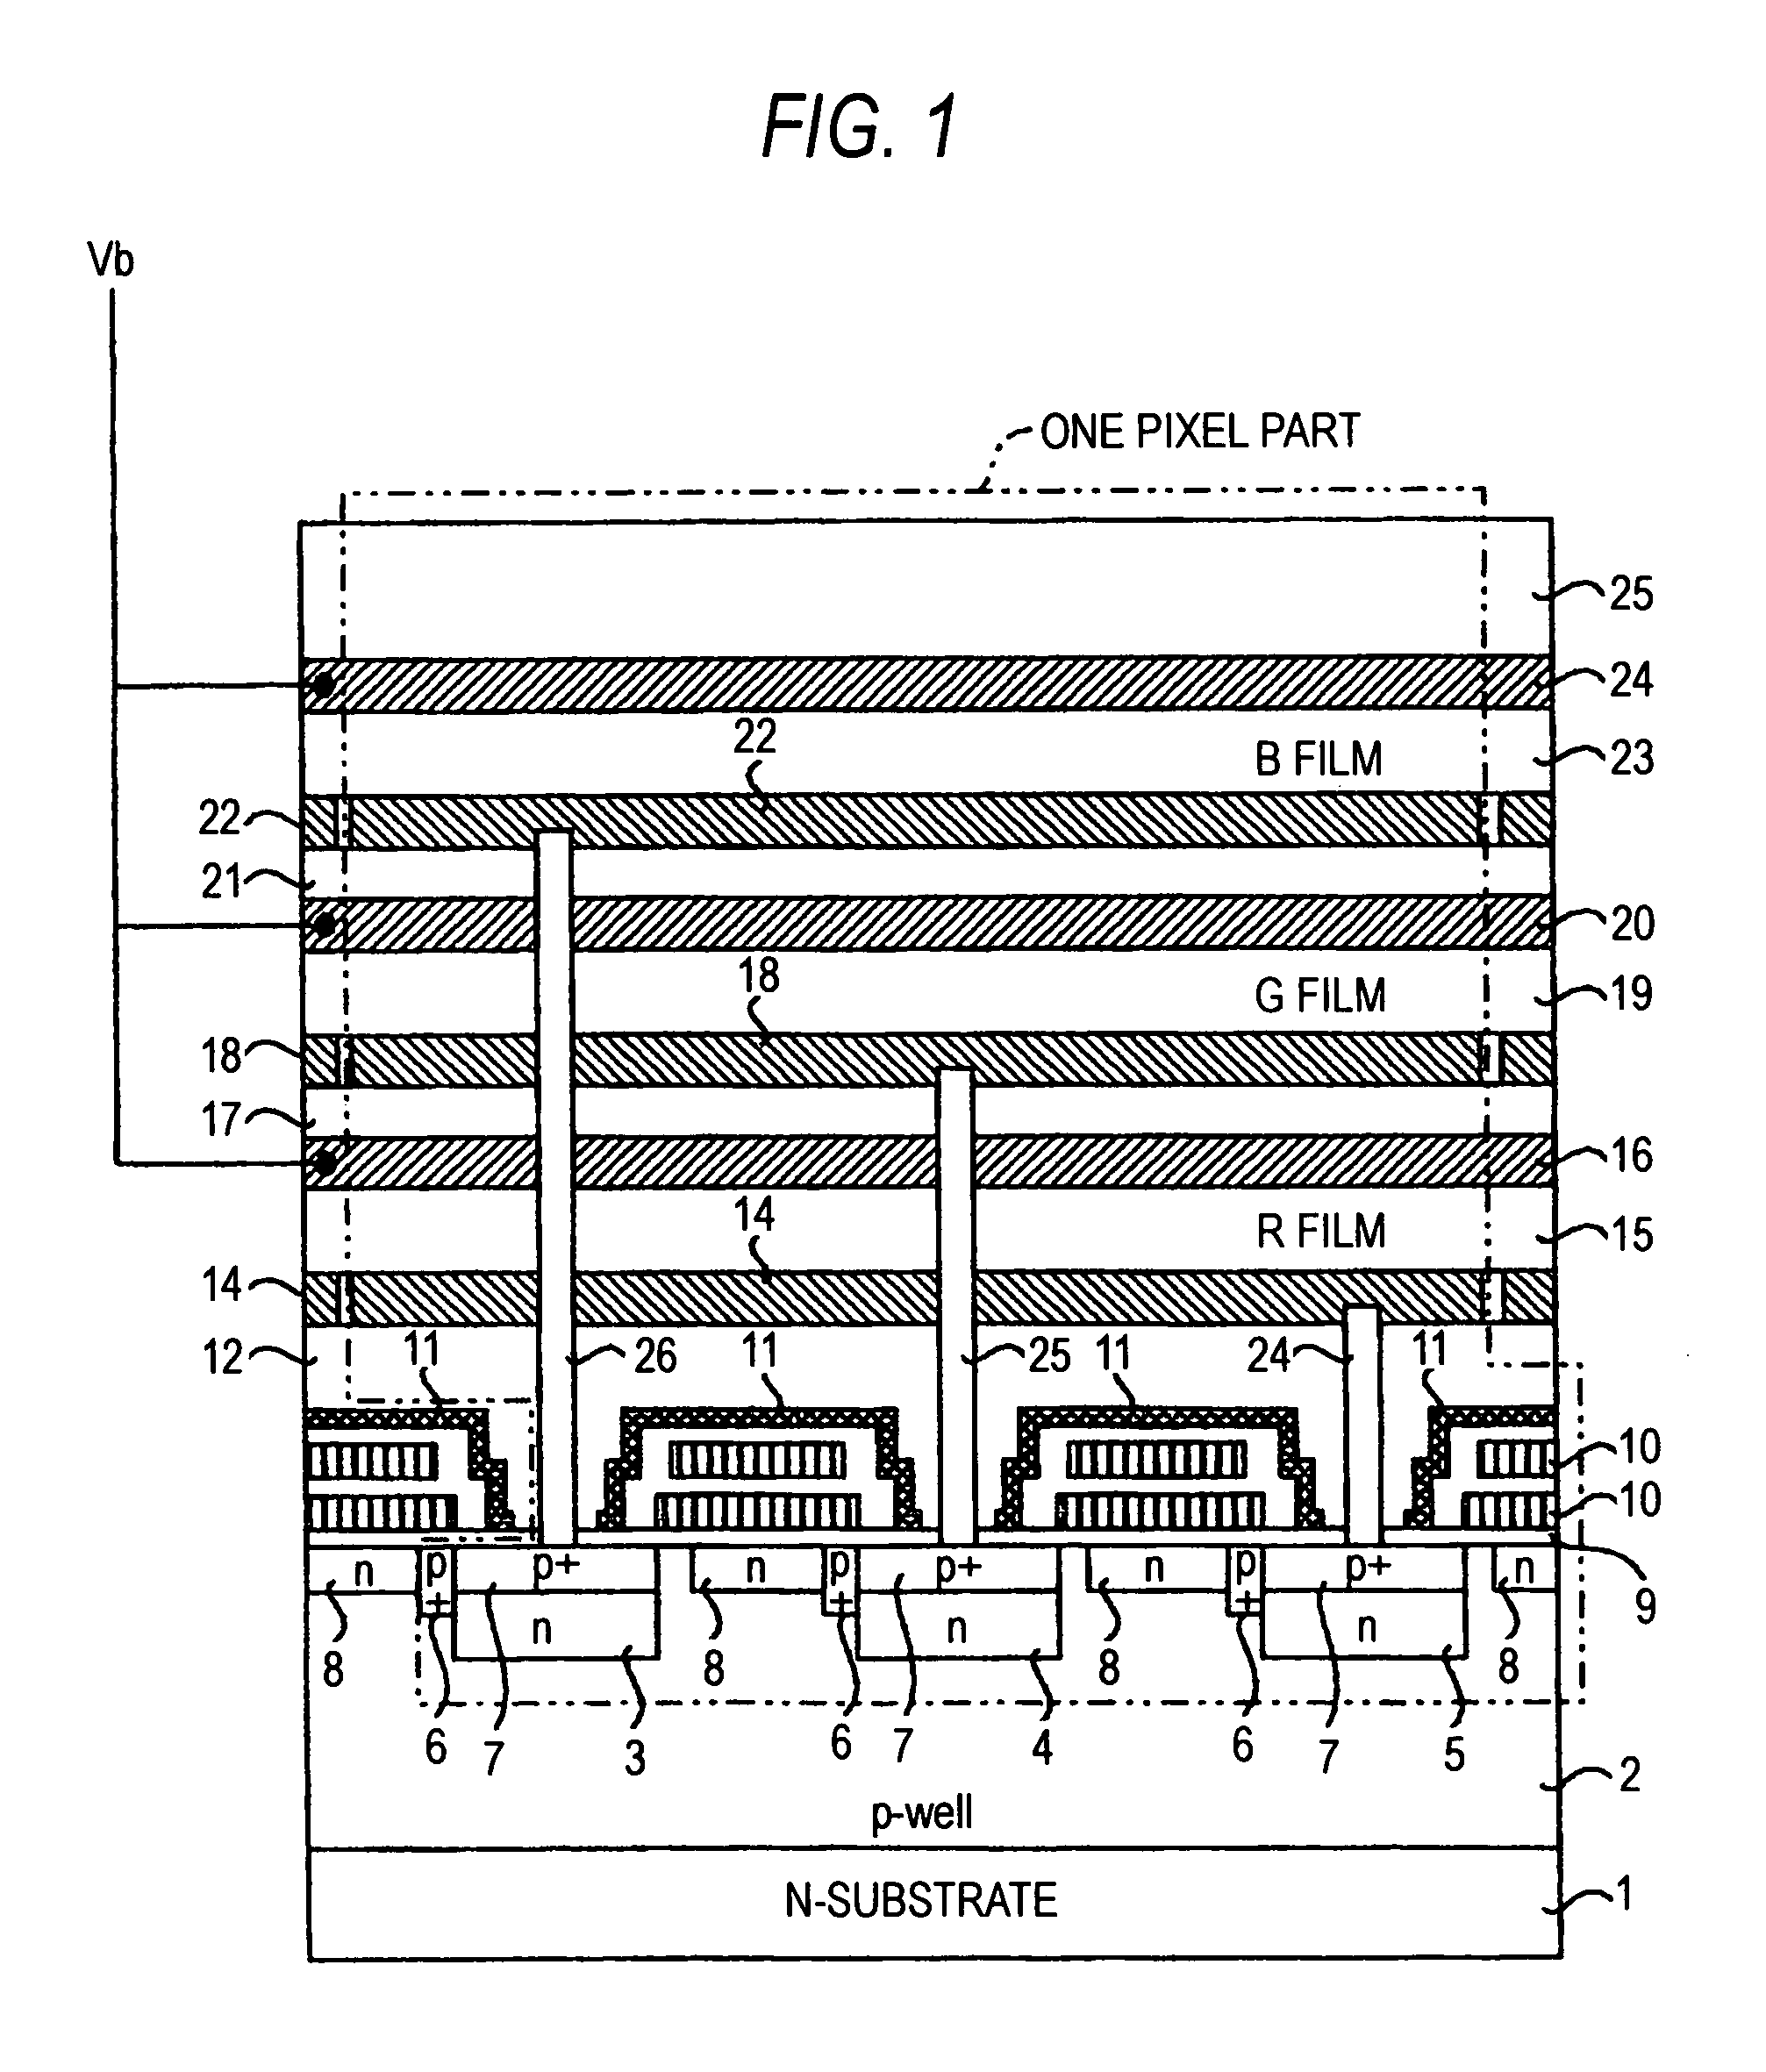 Solid-state imaging device including a plurality of pixel parts with a photoelectric conversion layer